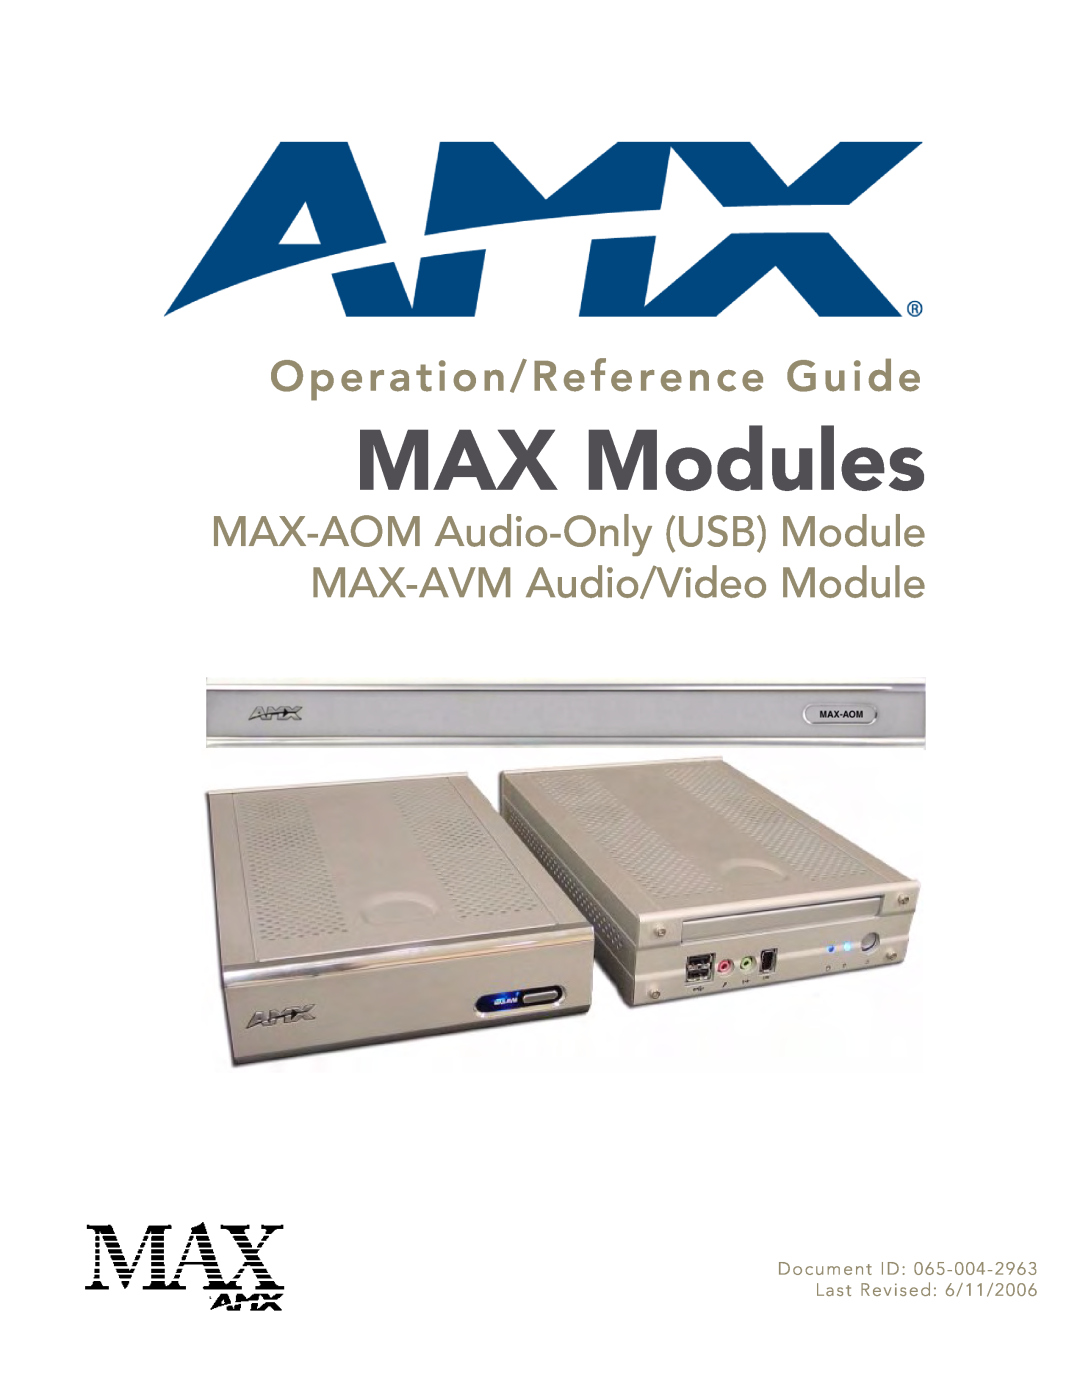 AMX manual MAX Modules, Operation/Reference Guide, MAX-AOM Audio-Only USB Module MAX-AVM Audio/Video Module 